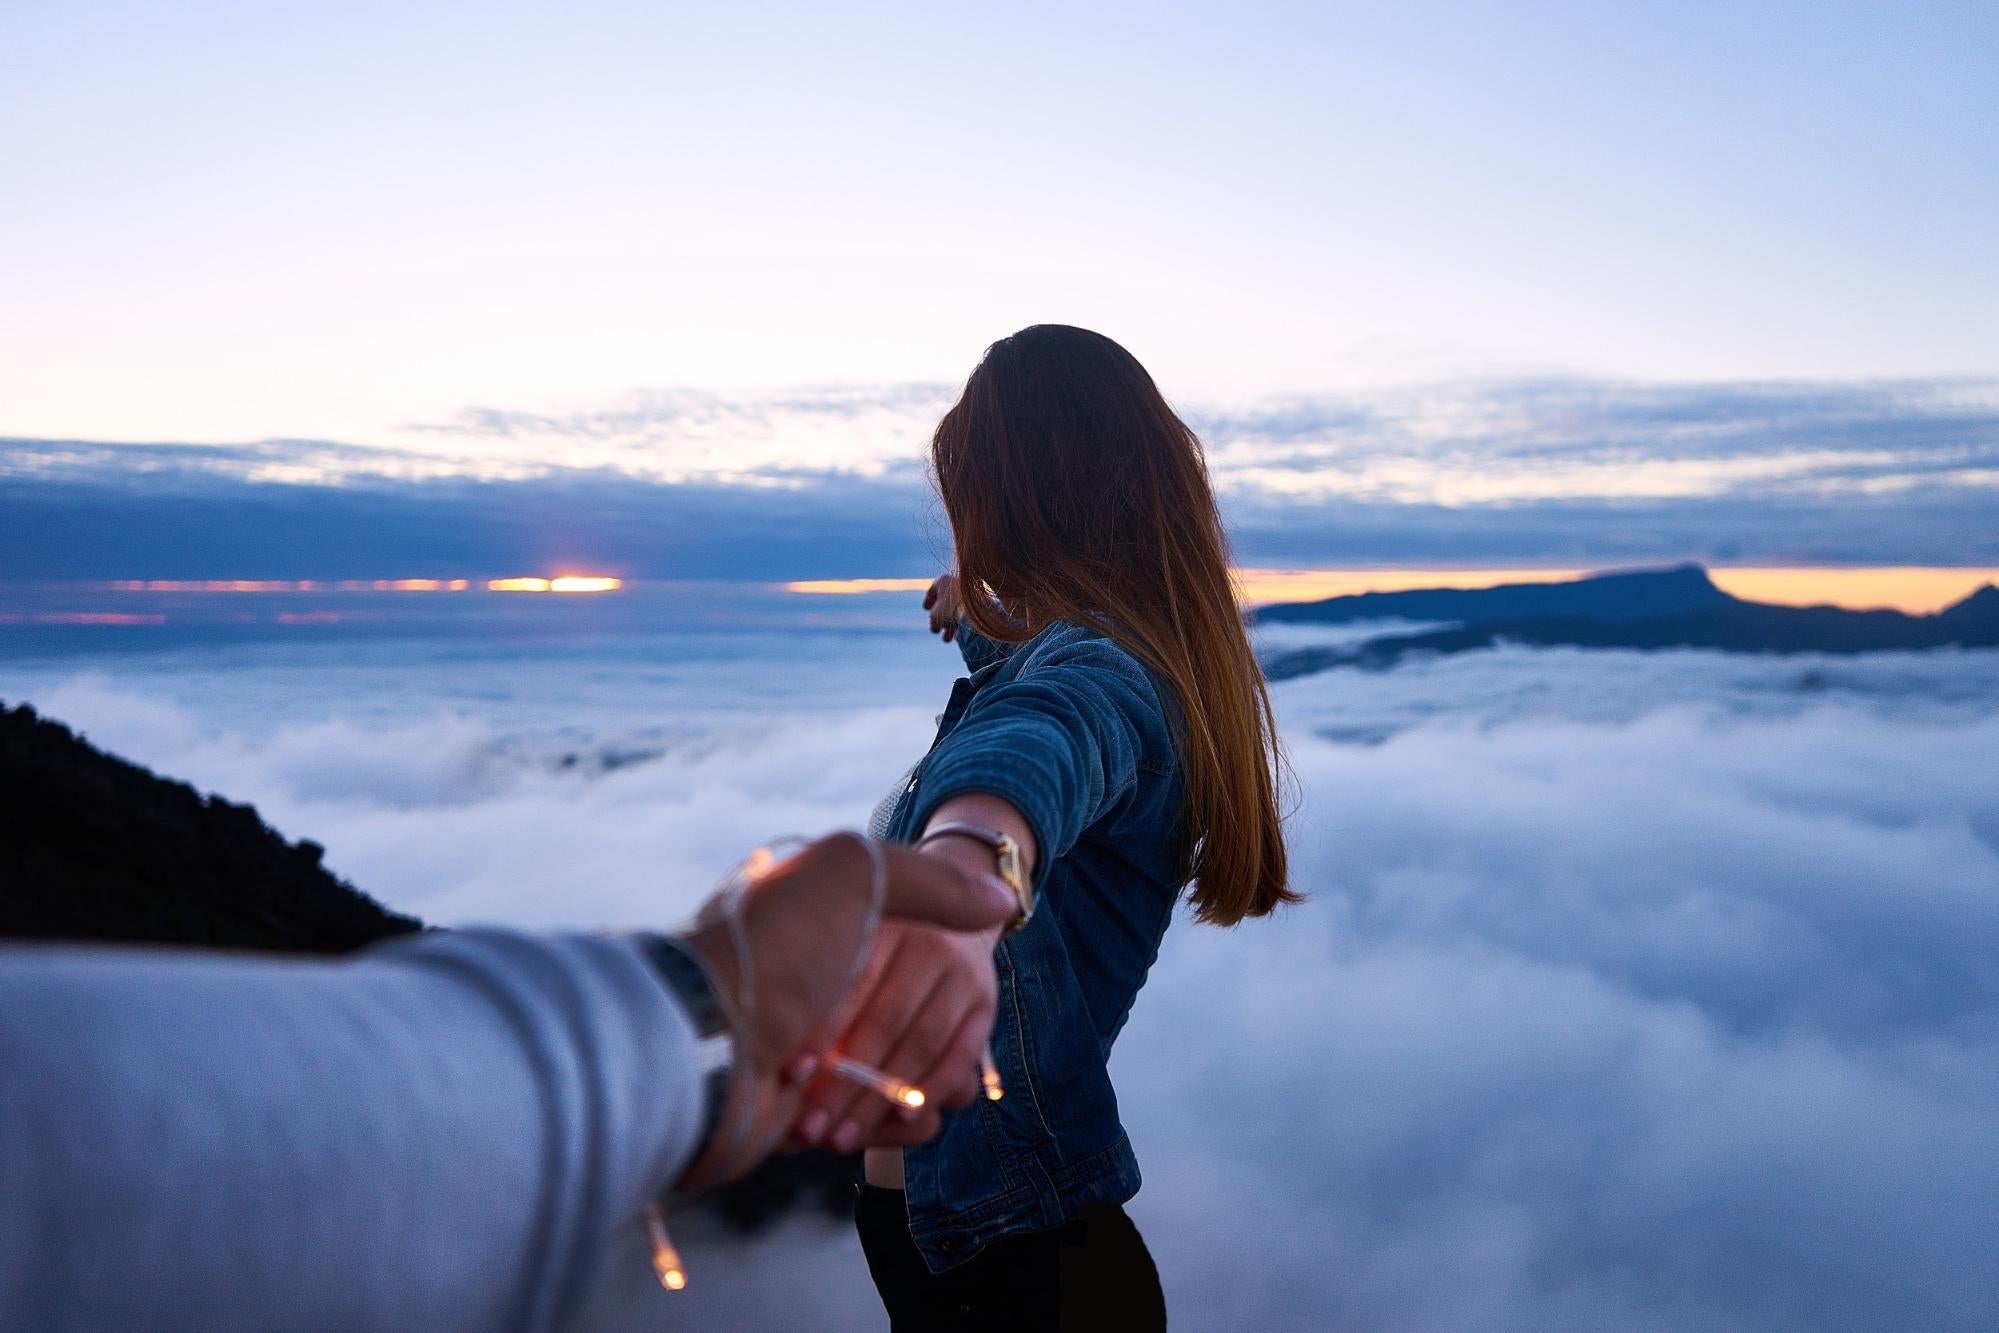 Romantic setup in clouds and fairy lights with a girl holding hands with partner